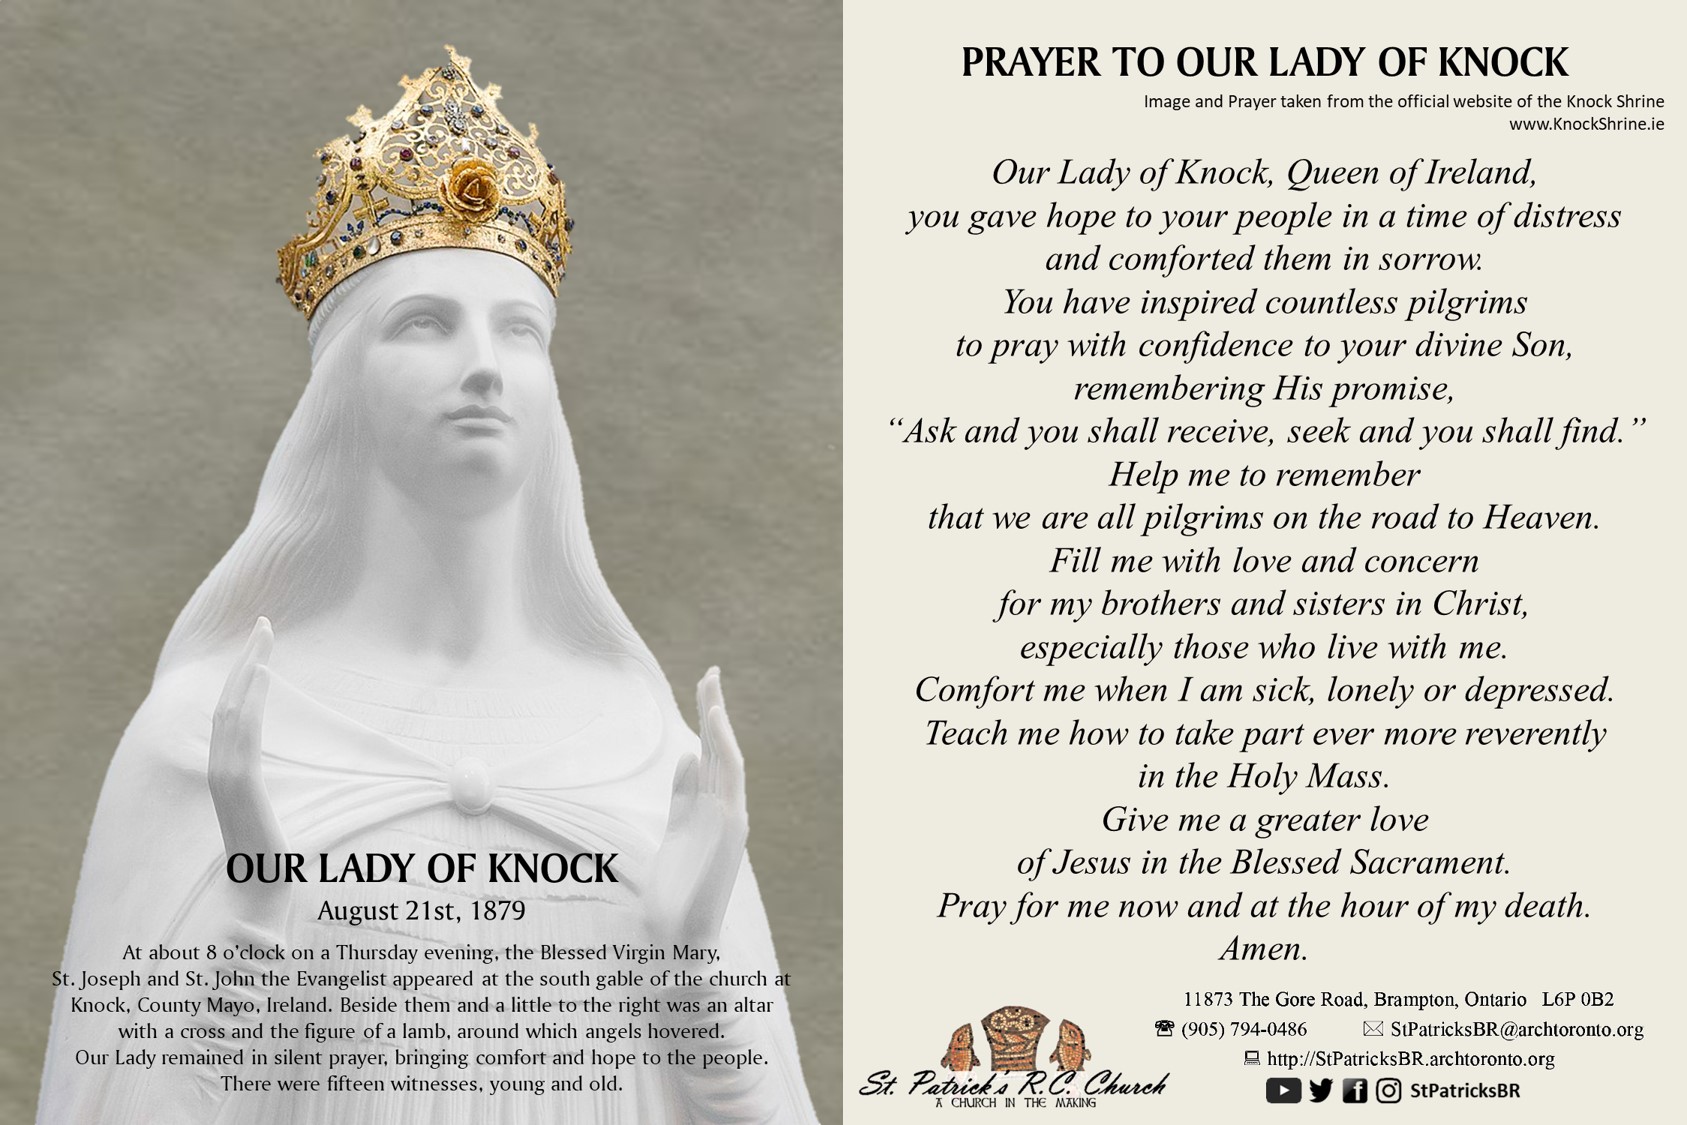 Prayer to Our Lady of Knock